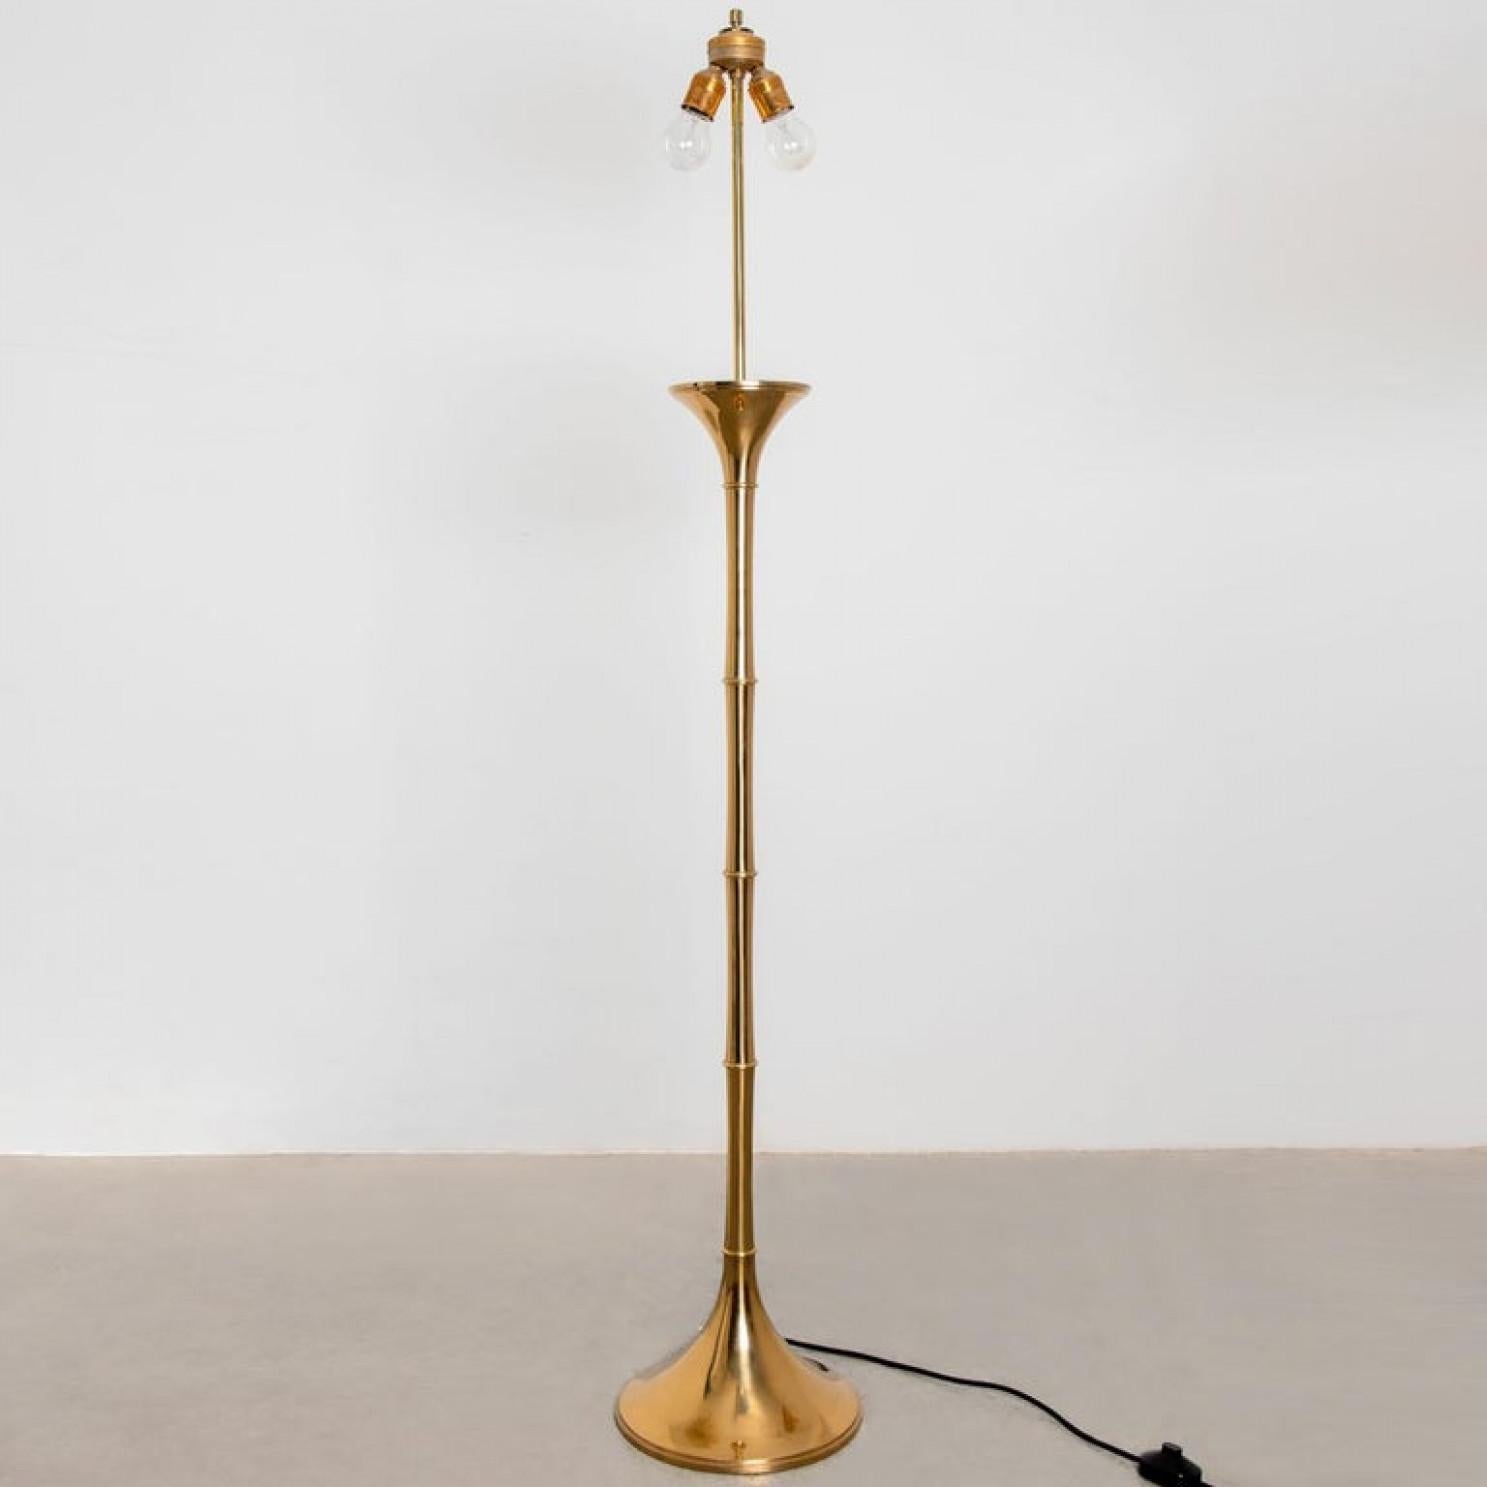 Pair of Table and Floor Lamp Designed by Ingo Maurer, 1968 For Sale 3